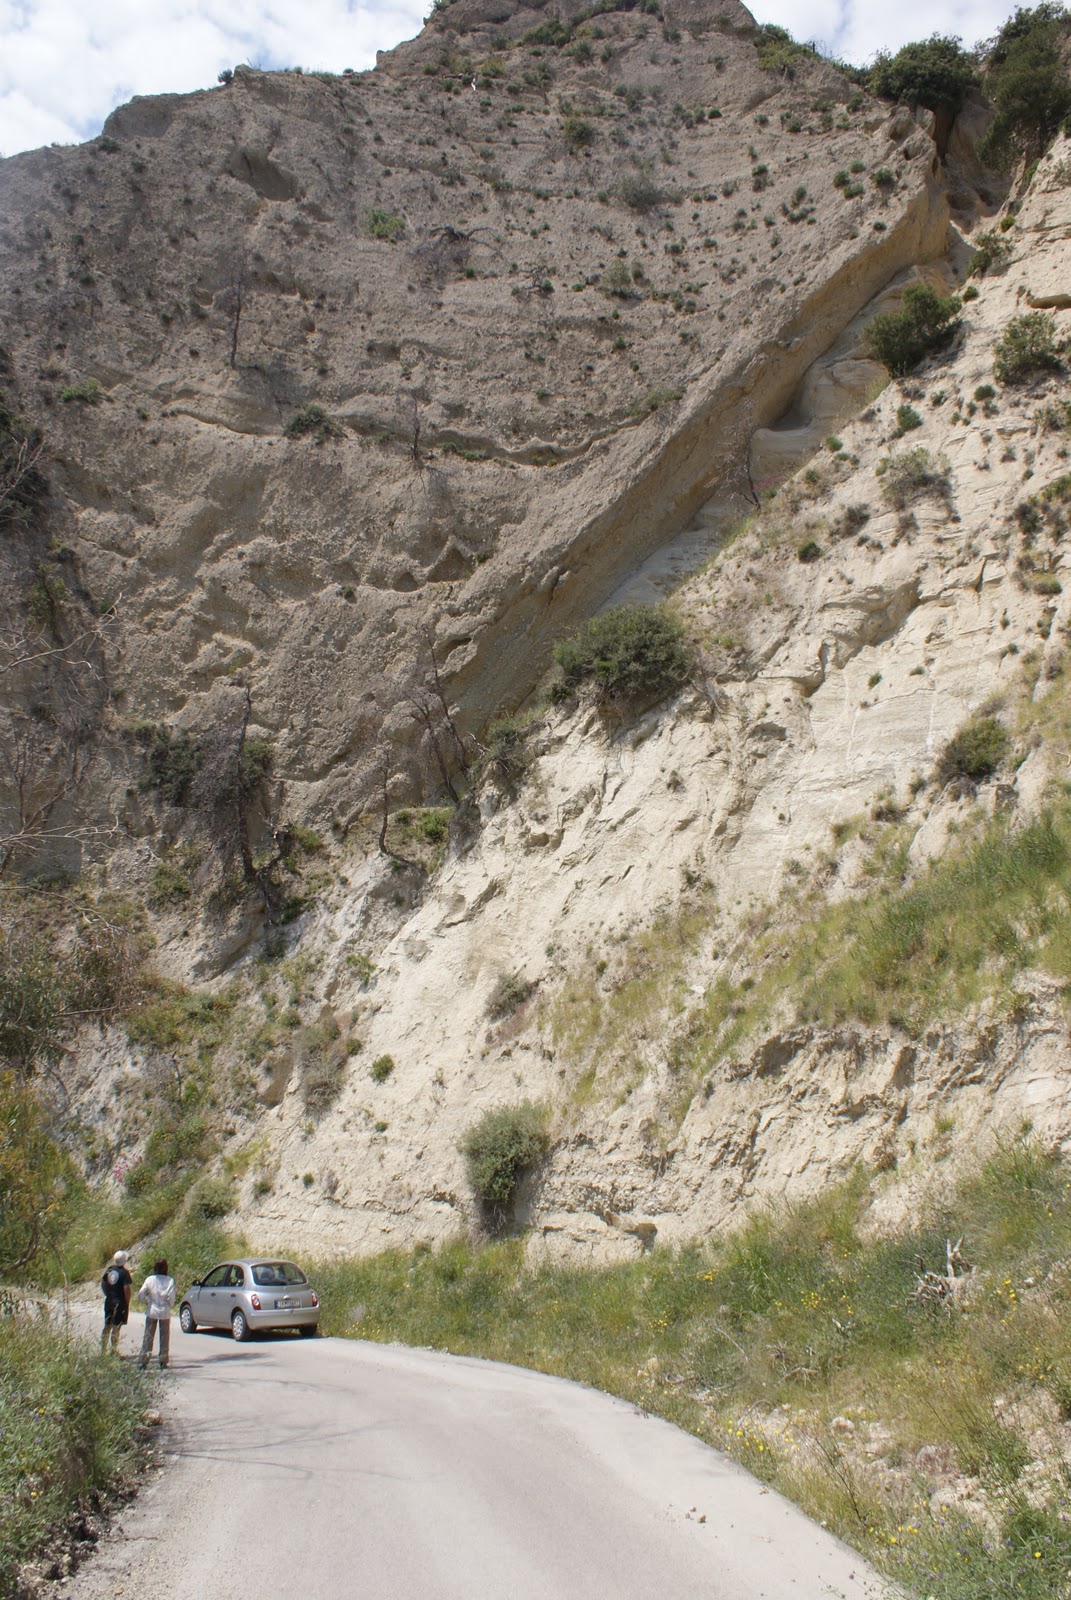 Fault in Central Greece showing highly permeability down-thrown gravel beds in the hangingwall juxtaposed against low permeability marl beds in the footwall. Juxtaposition of sediment/rock with different hydraulic properties is one of the main ways in which faults can impact sub surface fluid flow